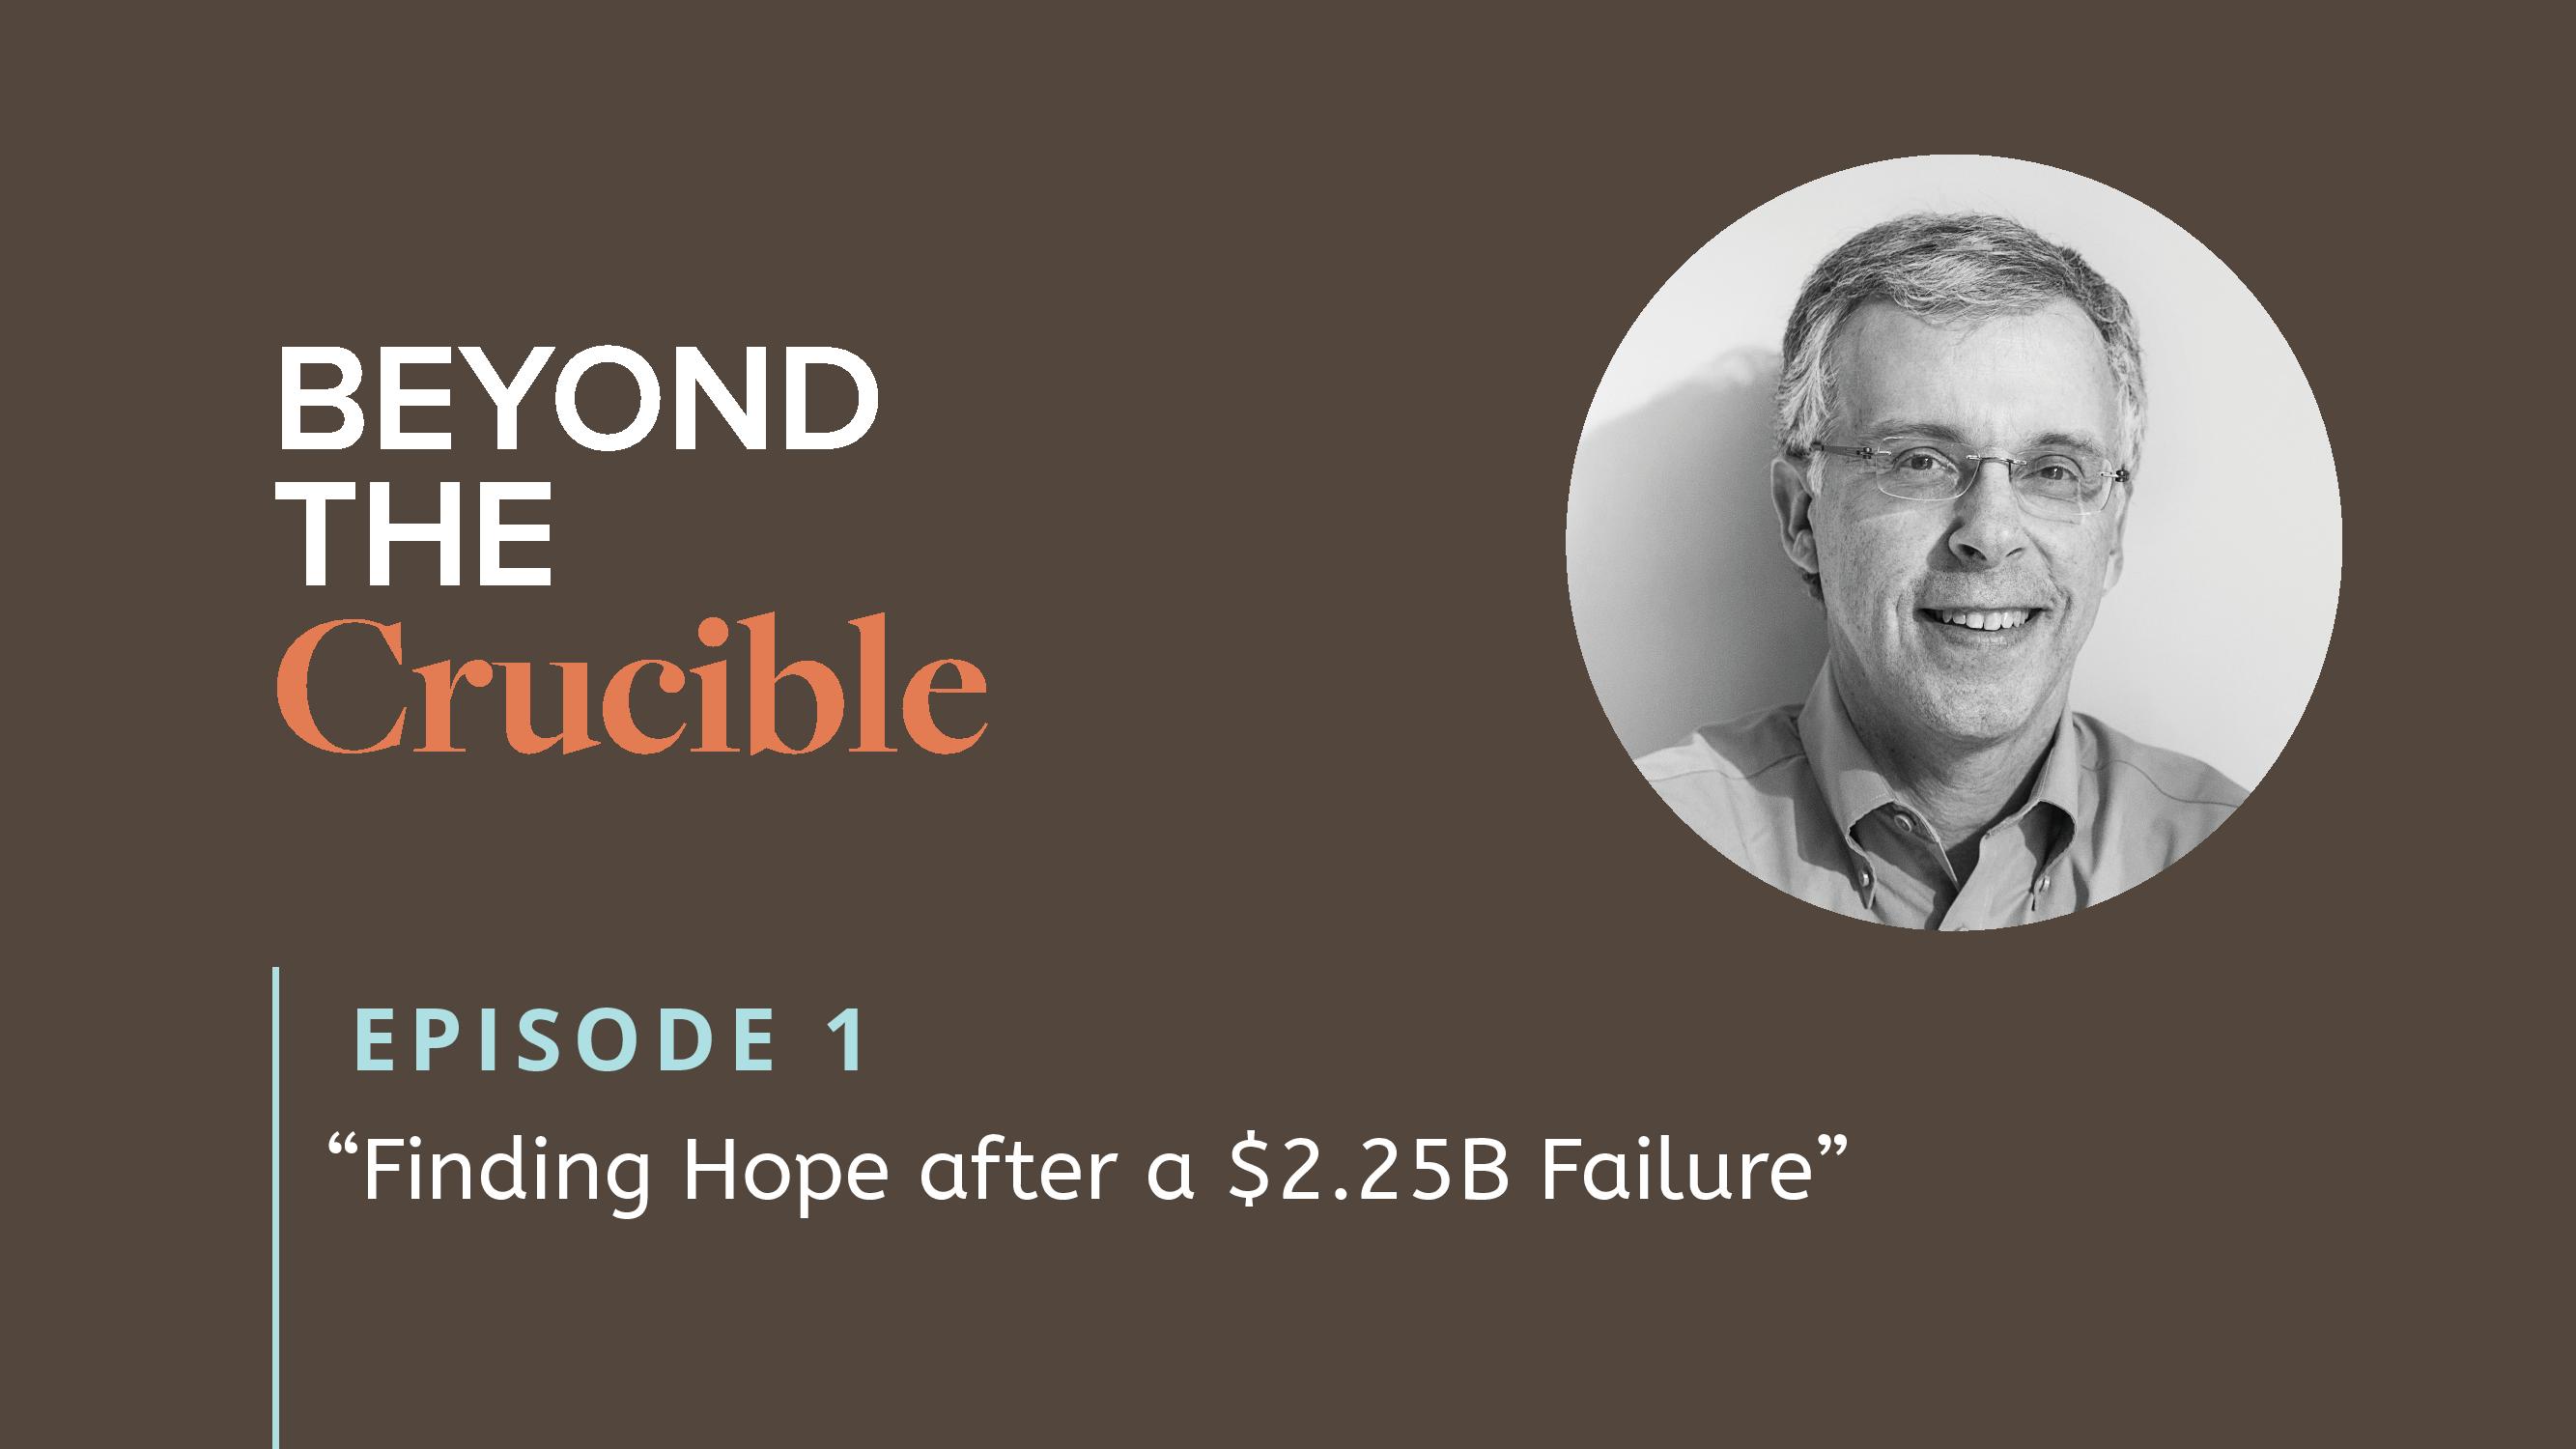 Finding hope after a $2.25B Failure